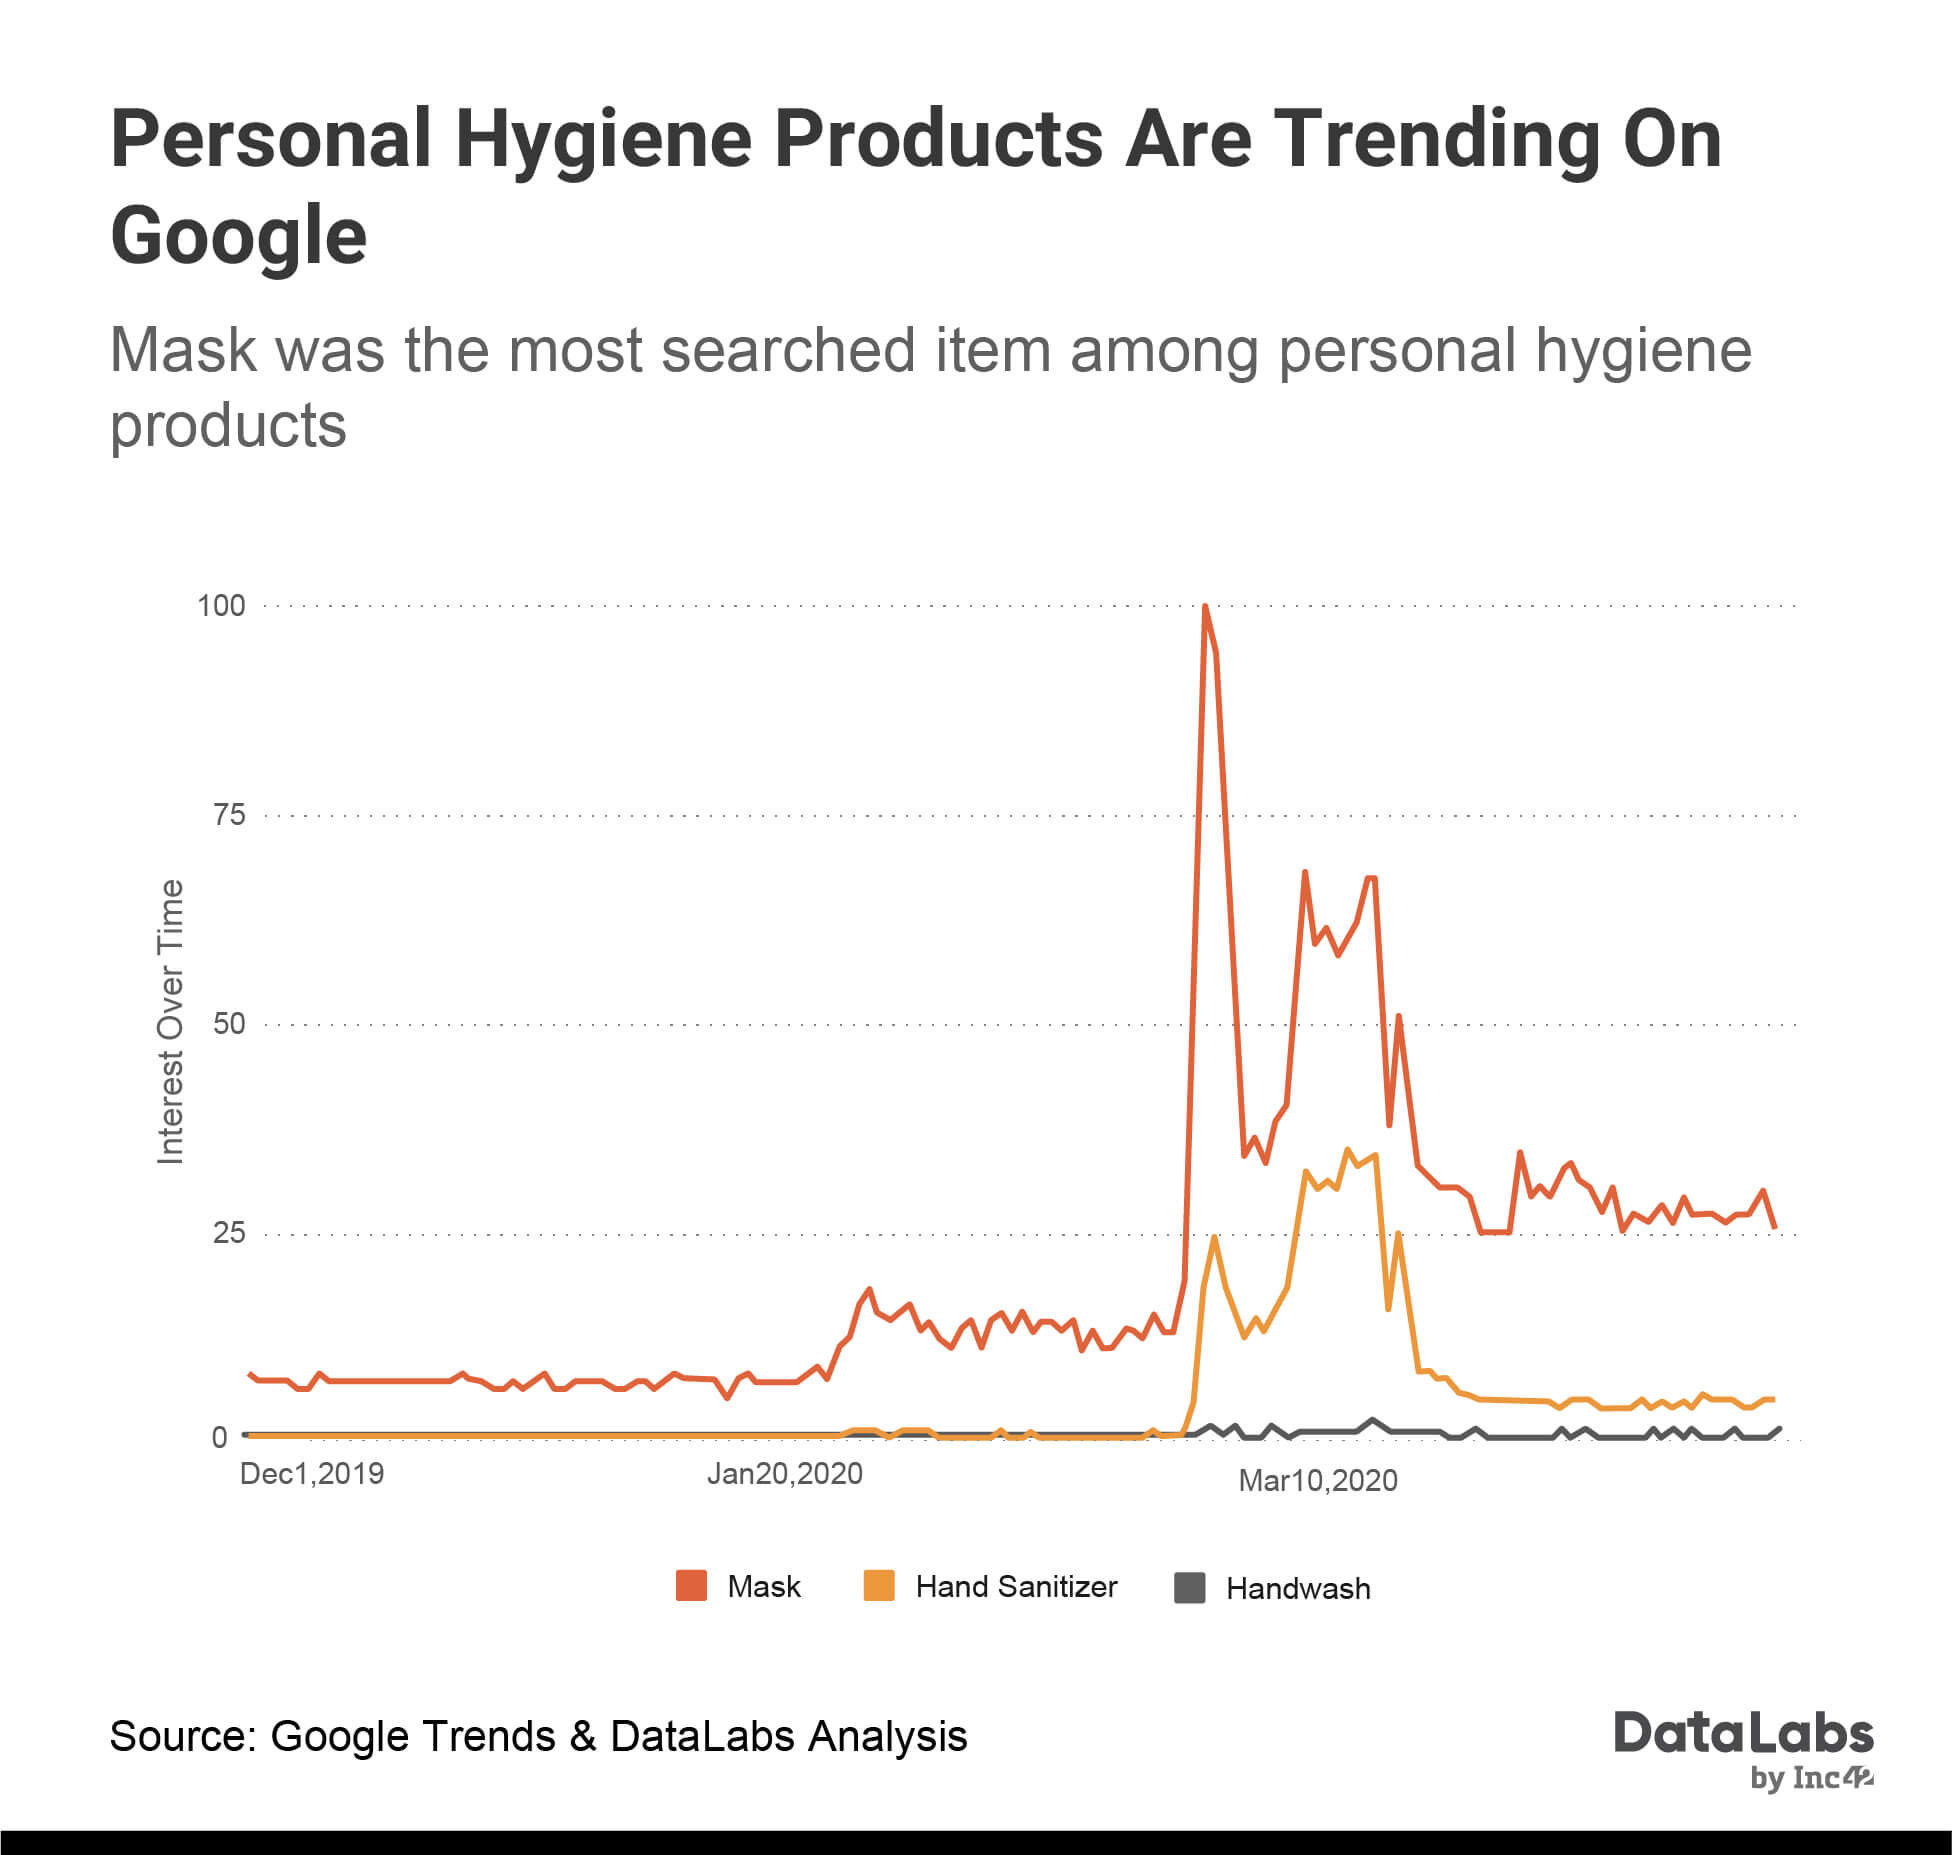 Personal Hygiene Product Trend